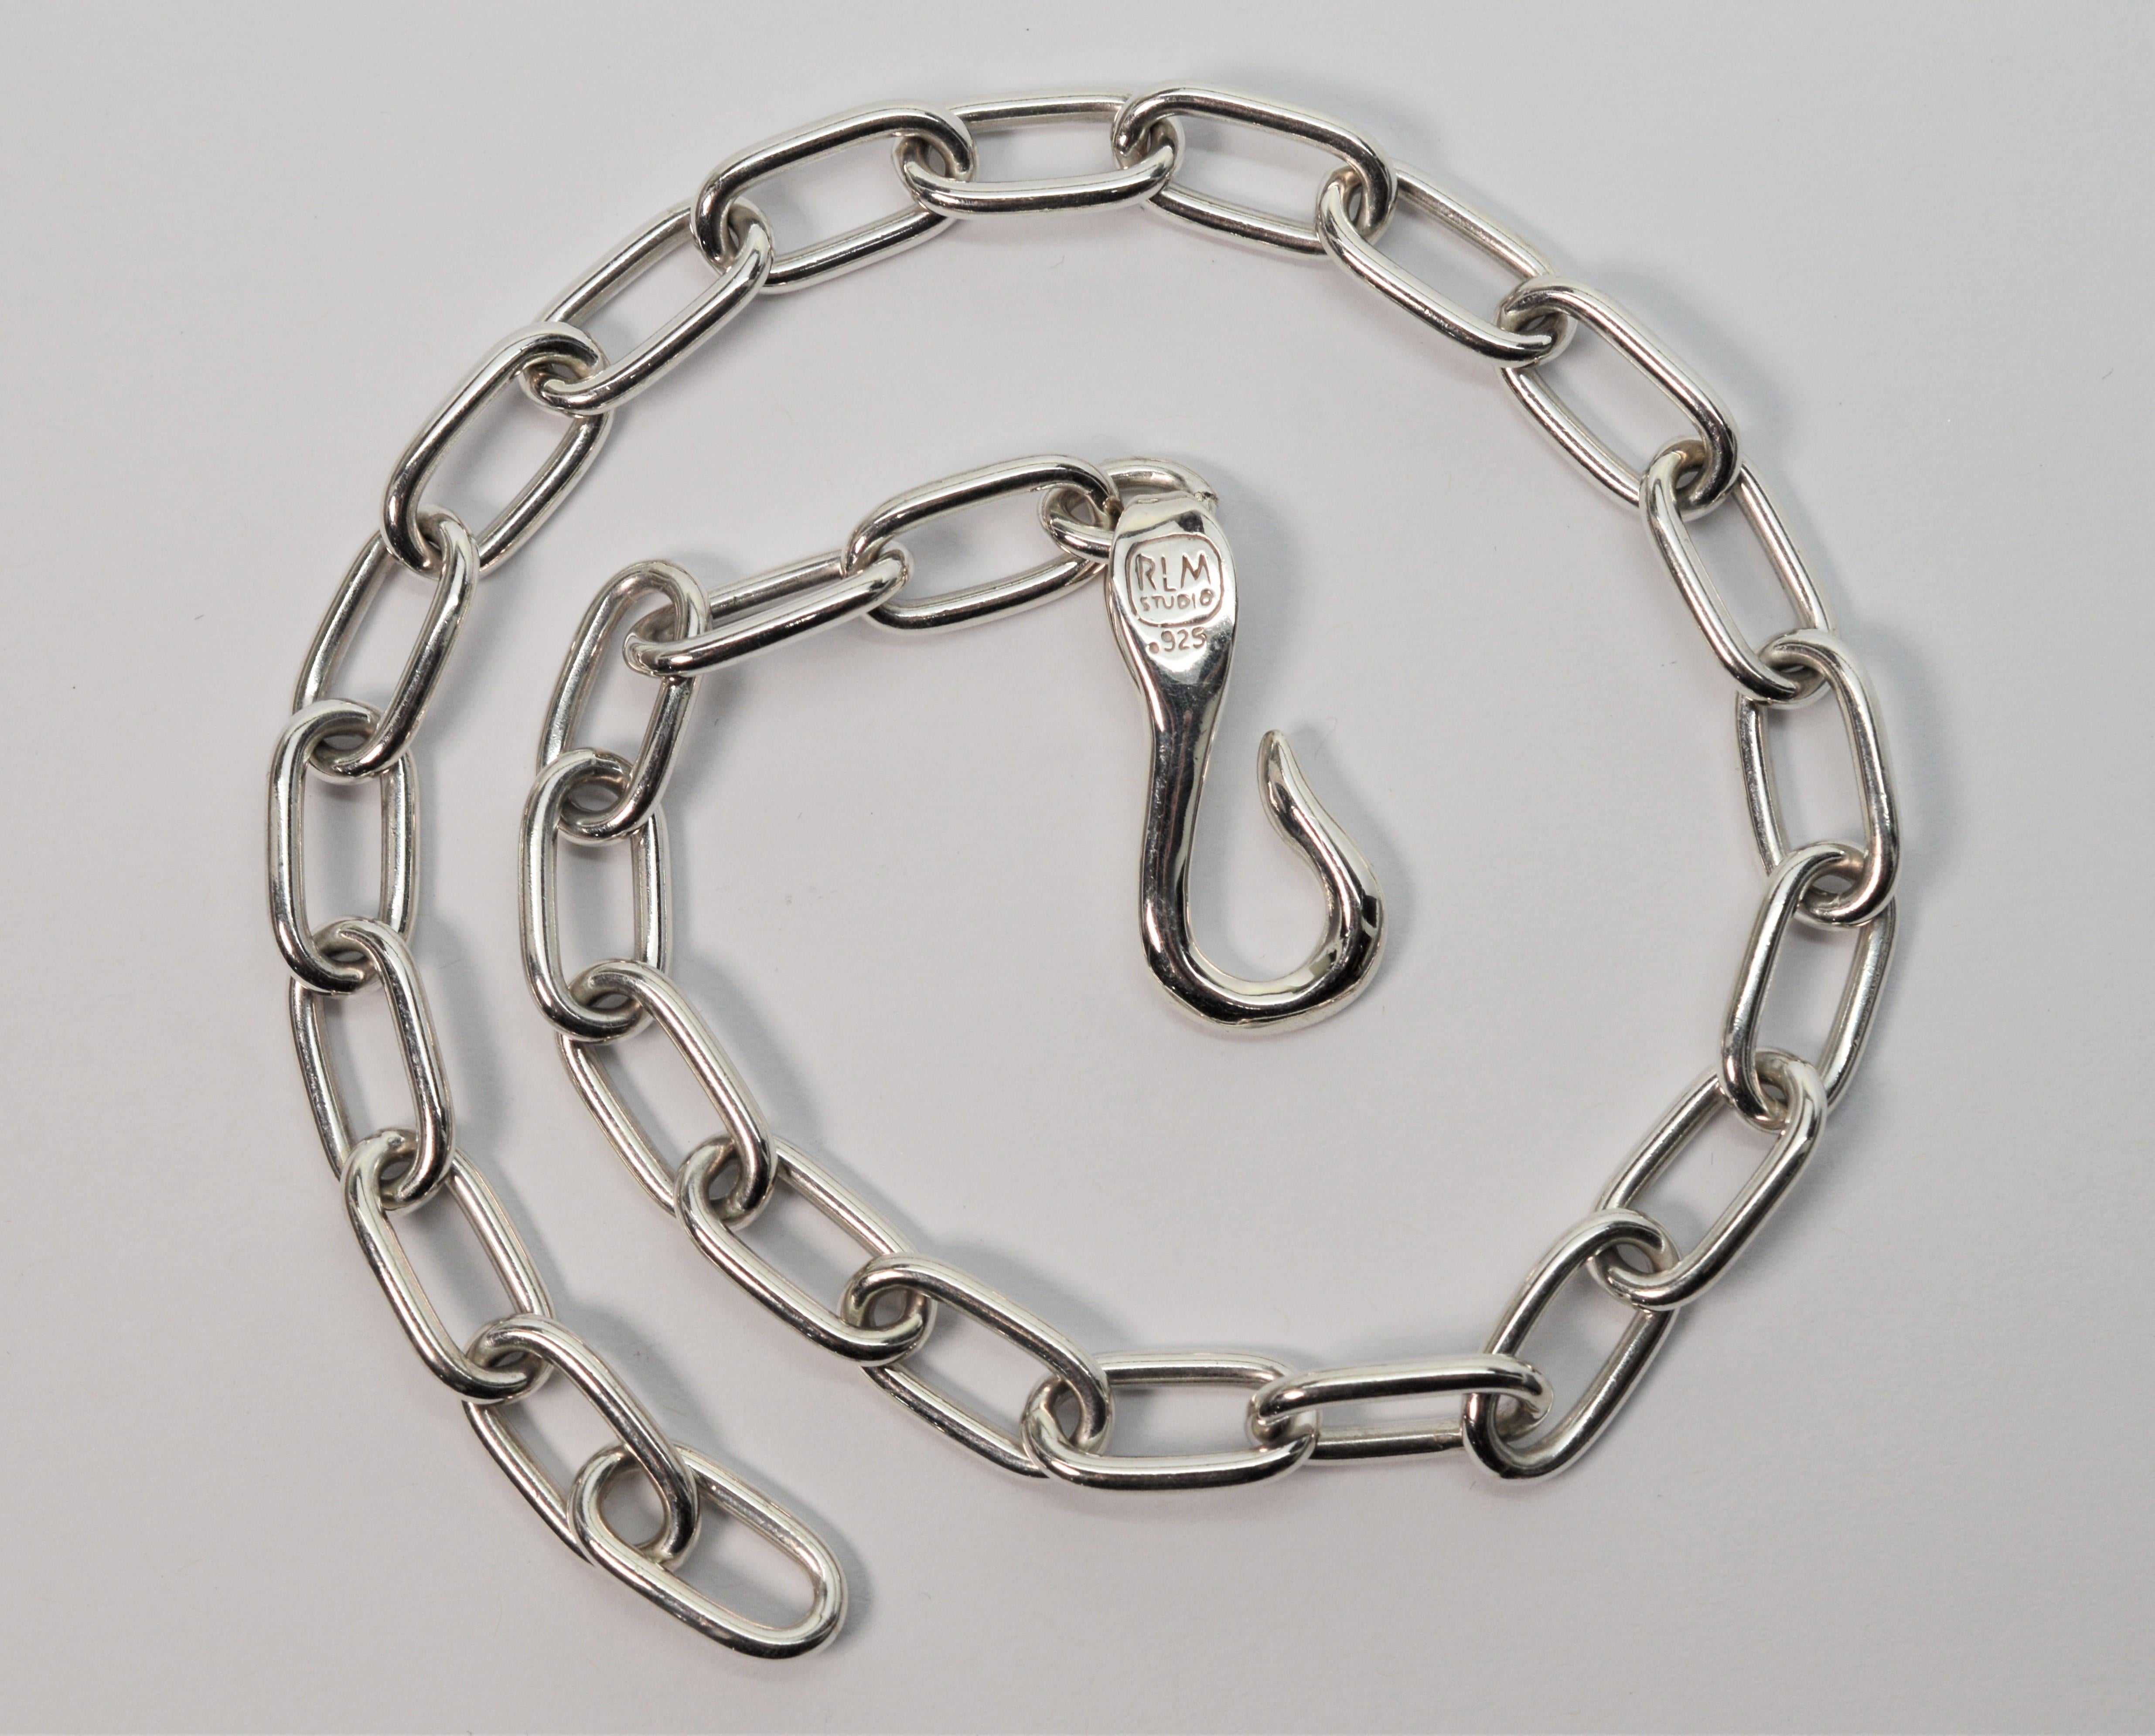 Urban style heavy sterling silver chain necklace by American jewelry designer and sculptor Robert Lee Morris. Elongated 3/8 inch links wide made of highly polished 2.5 mm gauge .925 sterling silver create this 17